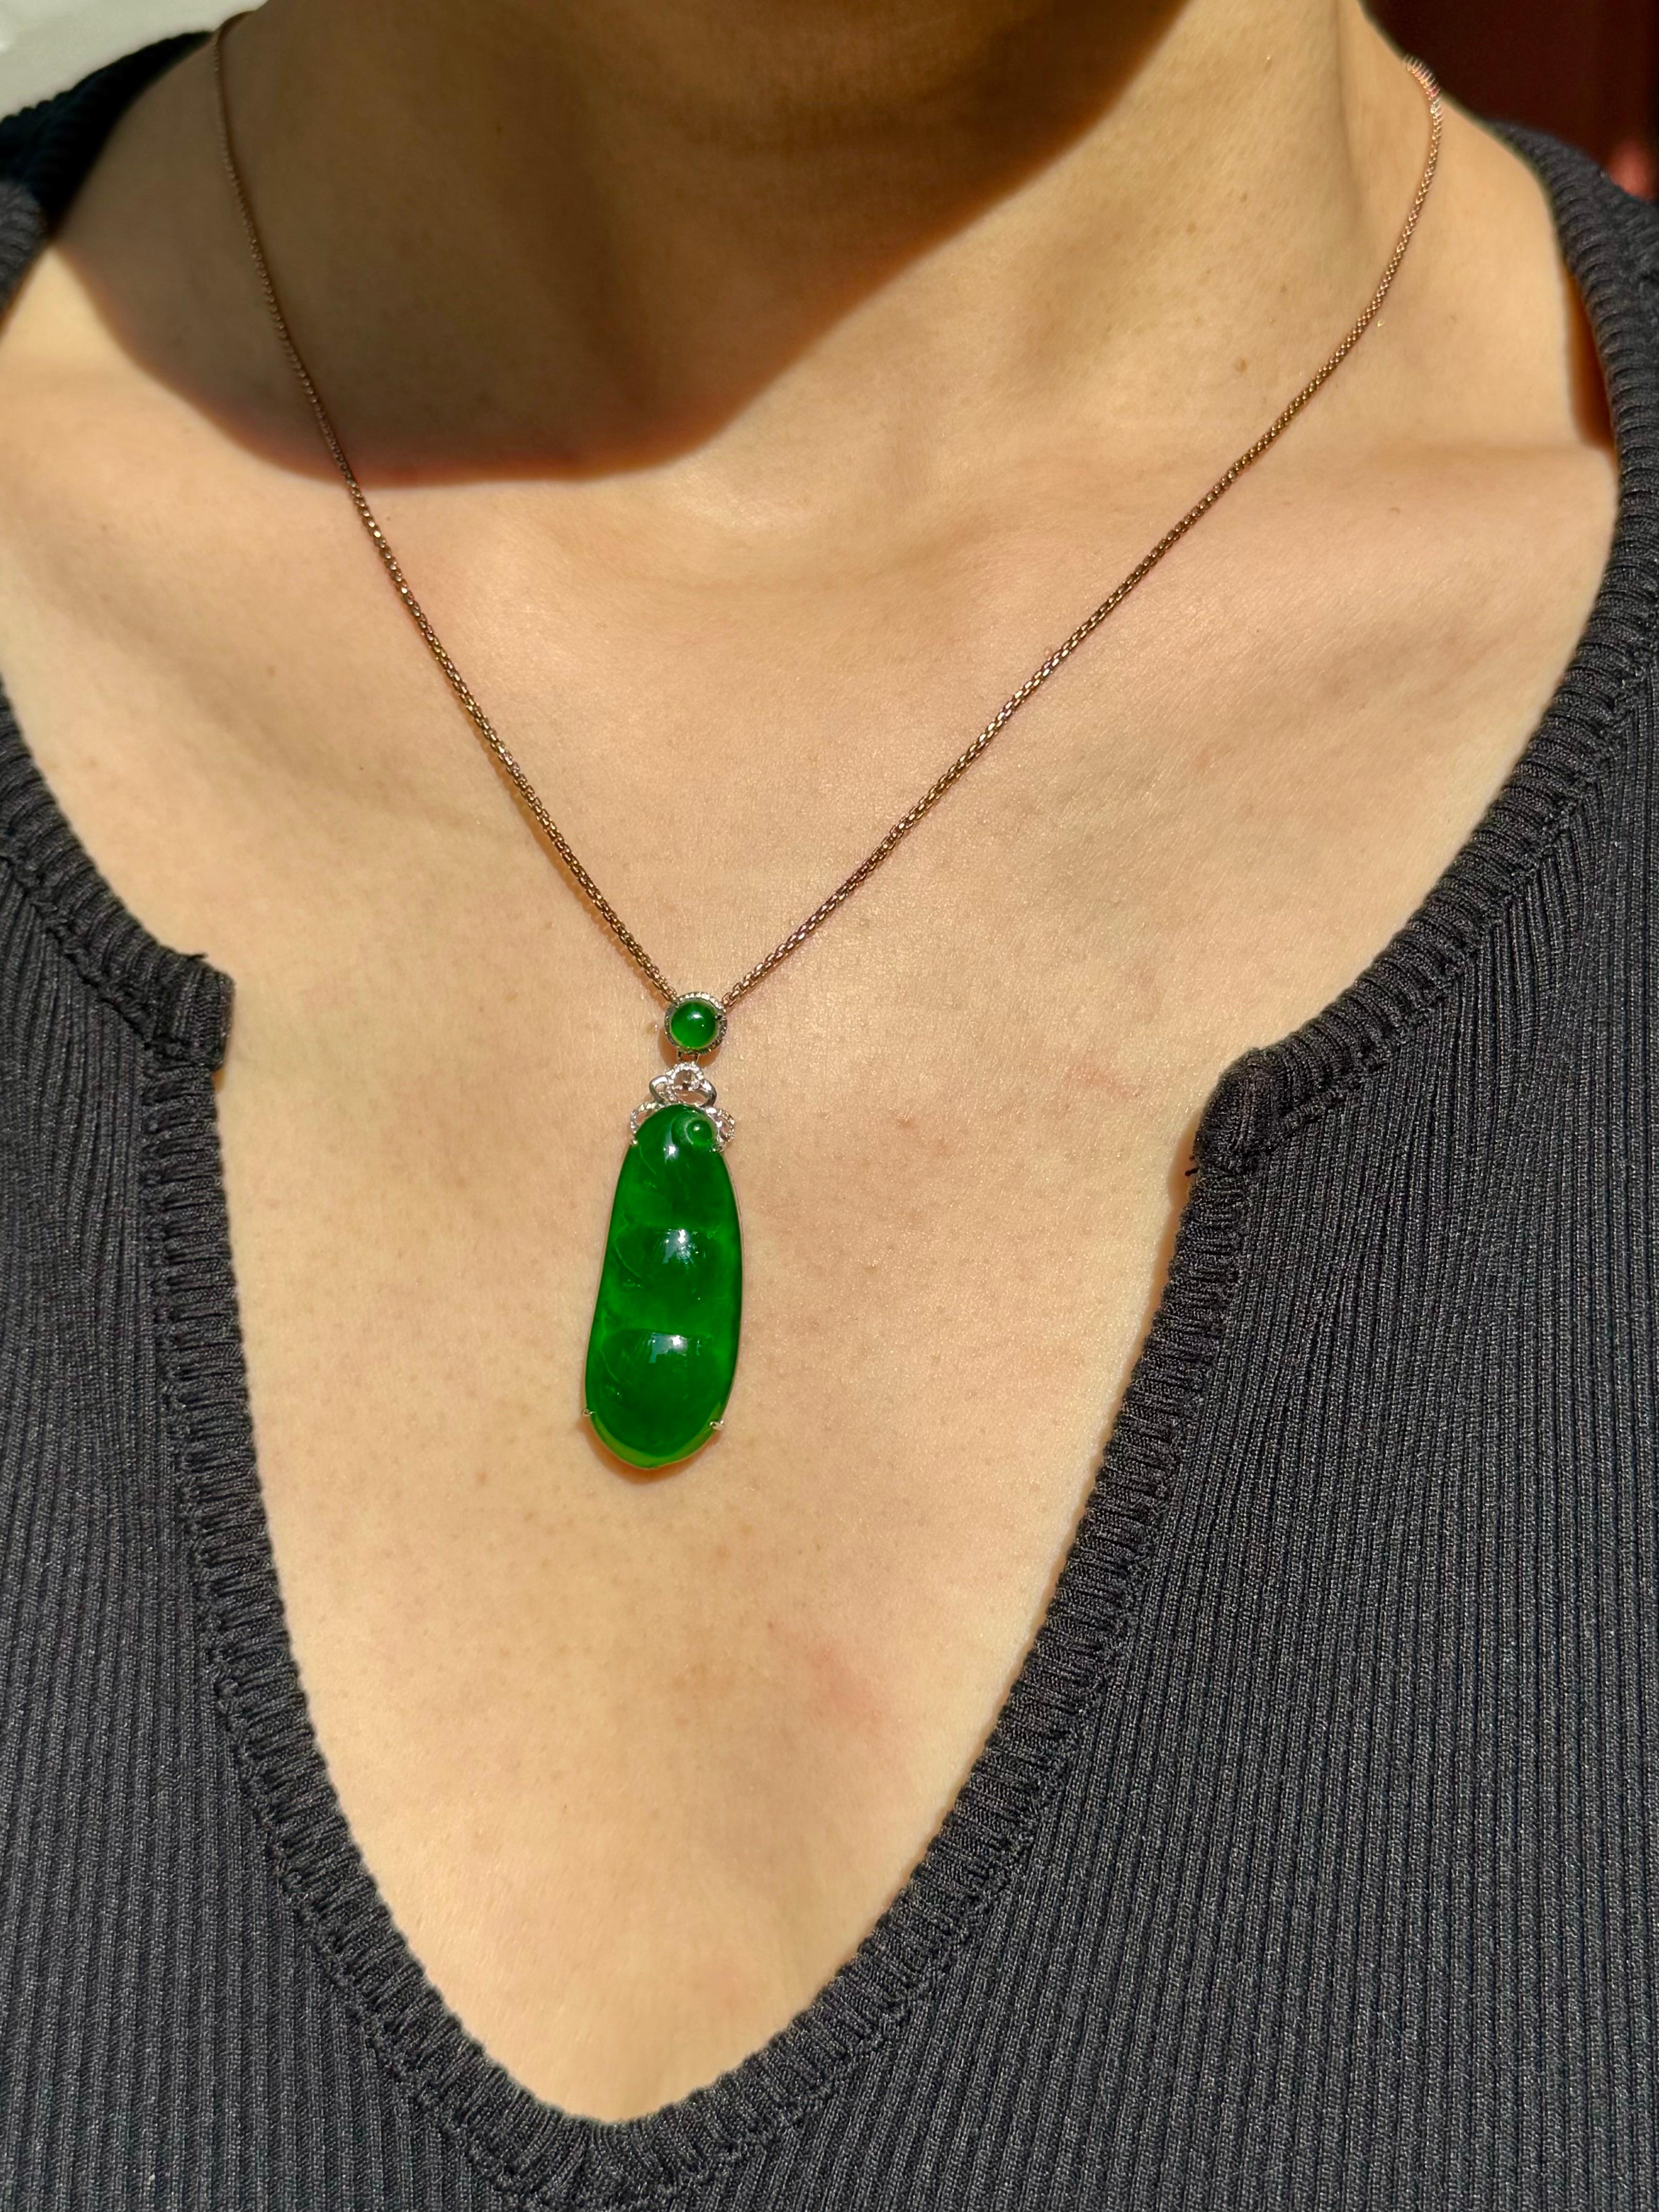 Please check out the HD video. This icy imperial Jadeite jade pendant is certified to be natural and without any treatments. It is rare to find such a large gem quality piece! To qualify as true imperial jade, it must have BOTH strong saturations of